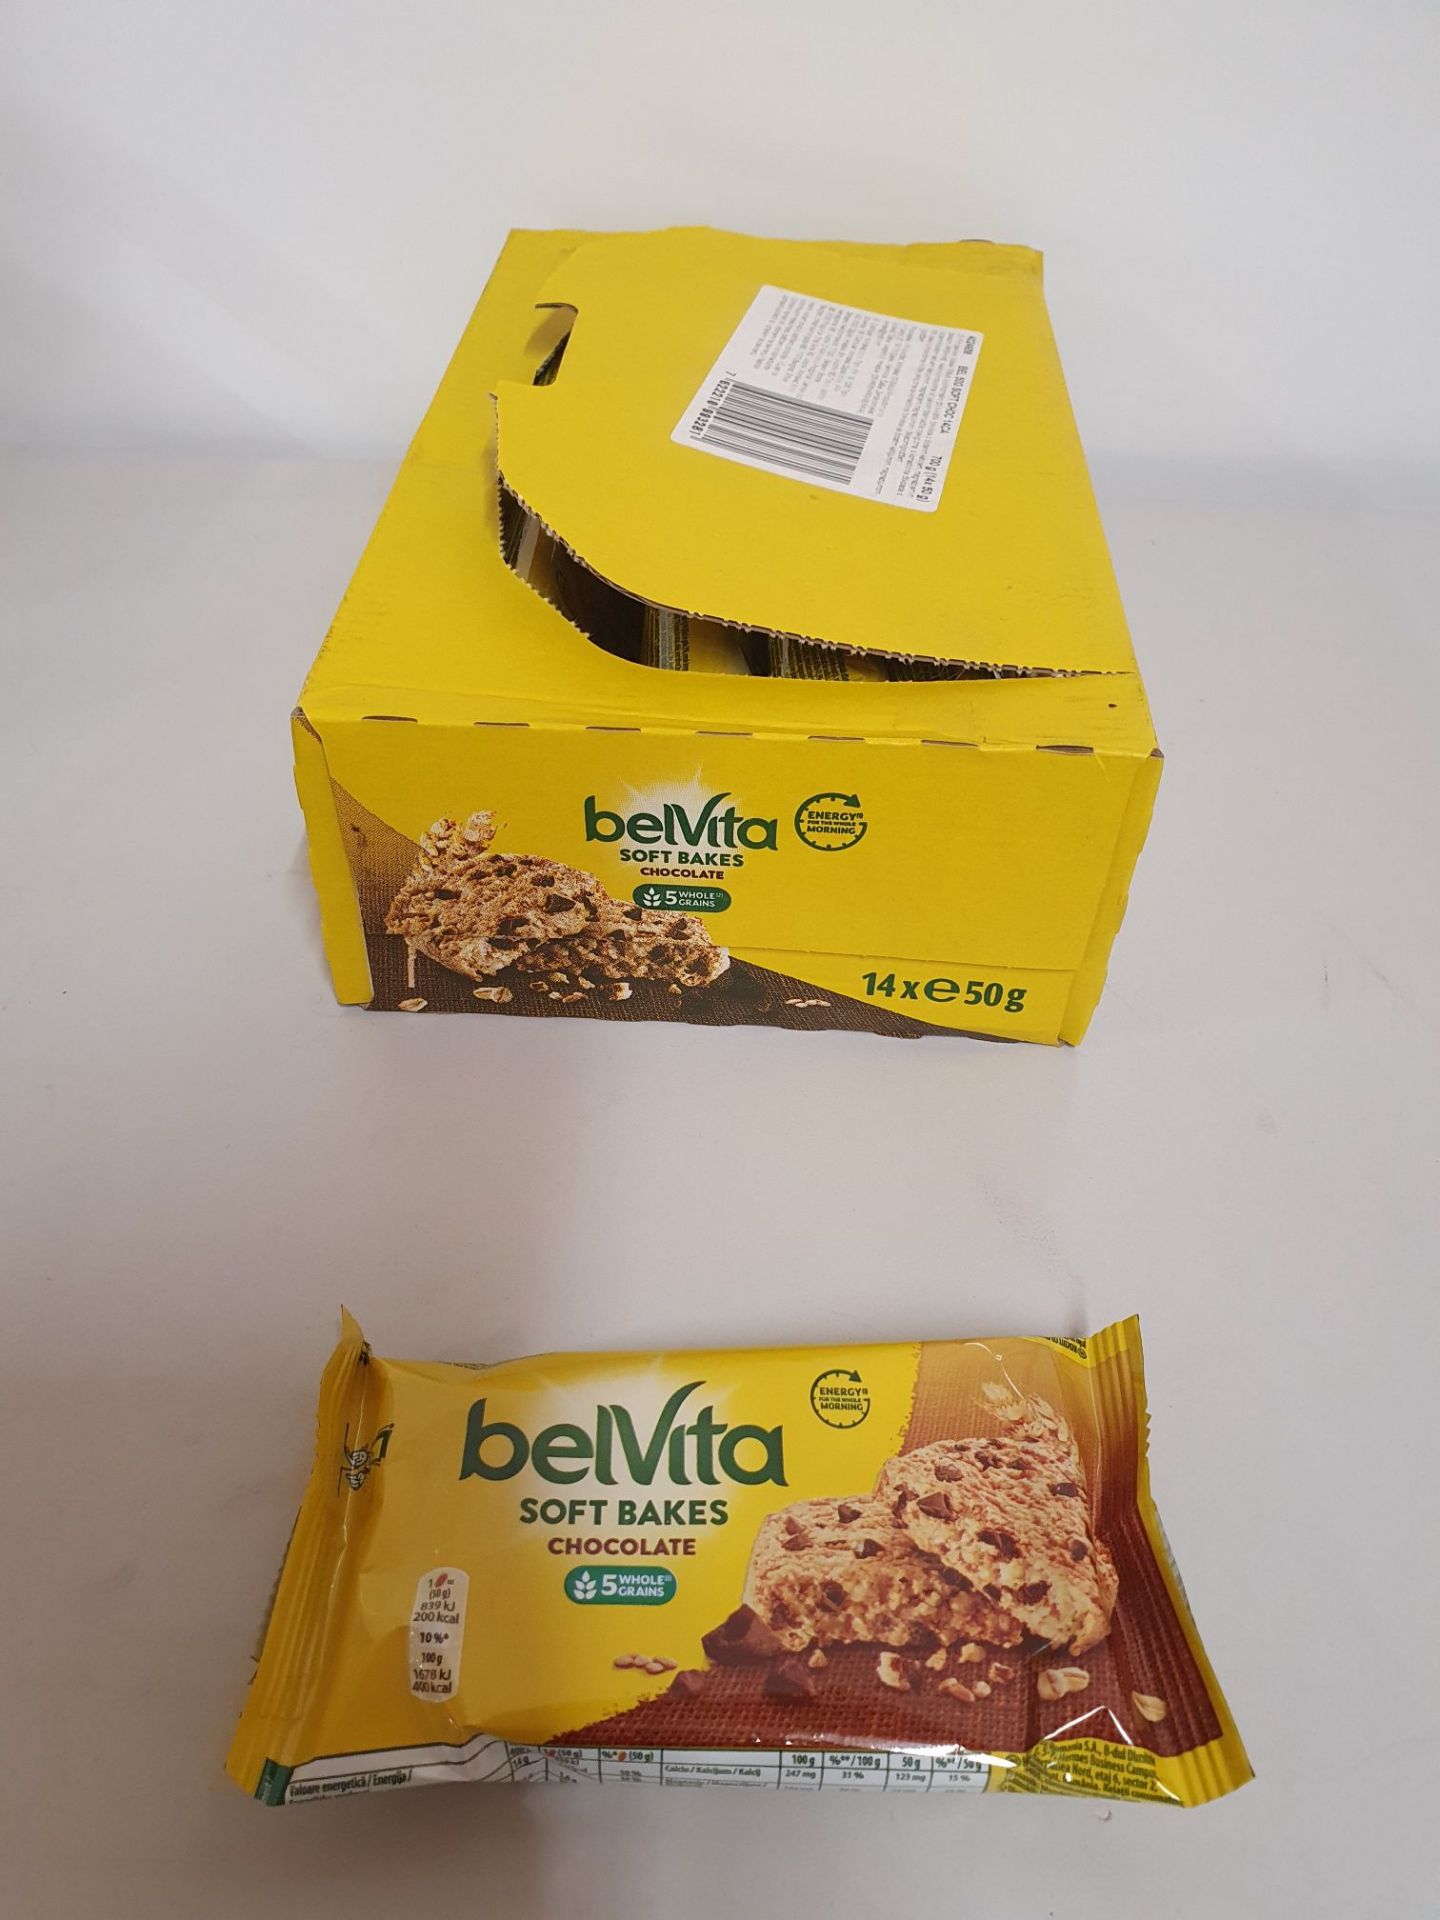 ONE LOT TO CONTAIN ONE BOX OF BELVITA SOFT BAKES CHOC CHIP BARS. 14 X 50G BAR. BEST BEFORE 04/12/20.